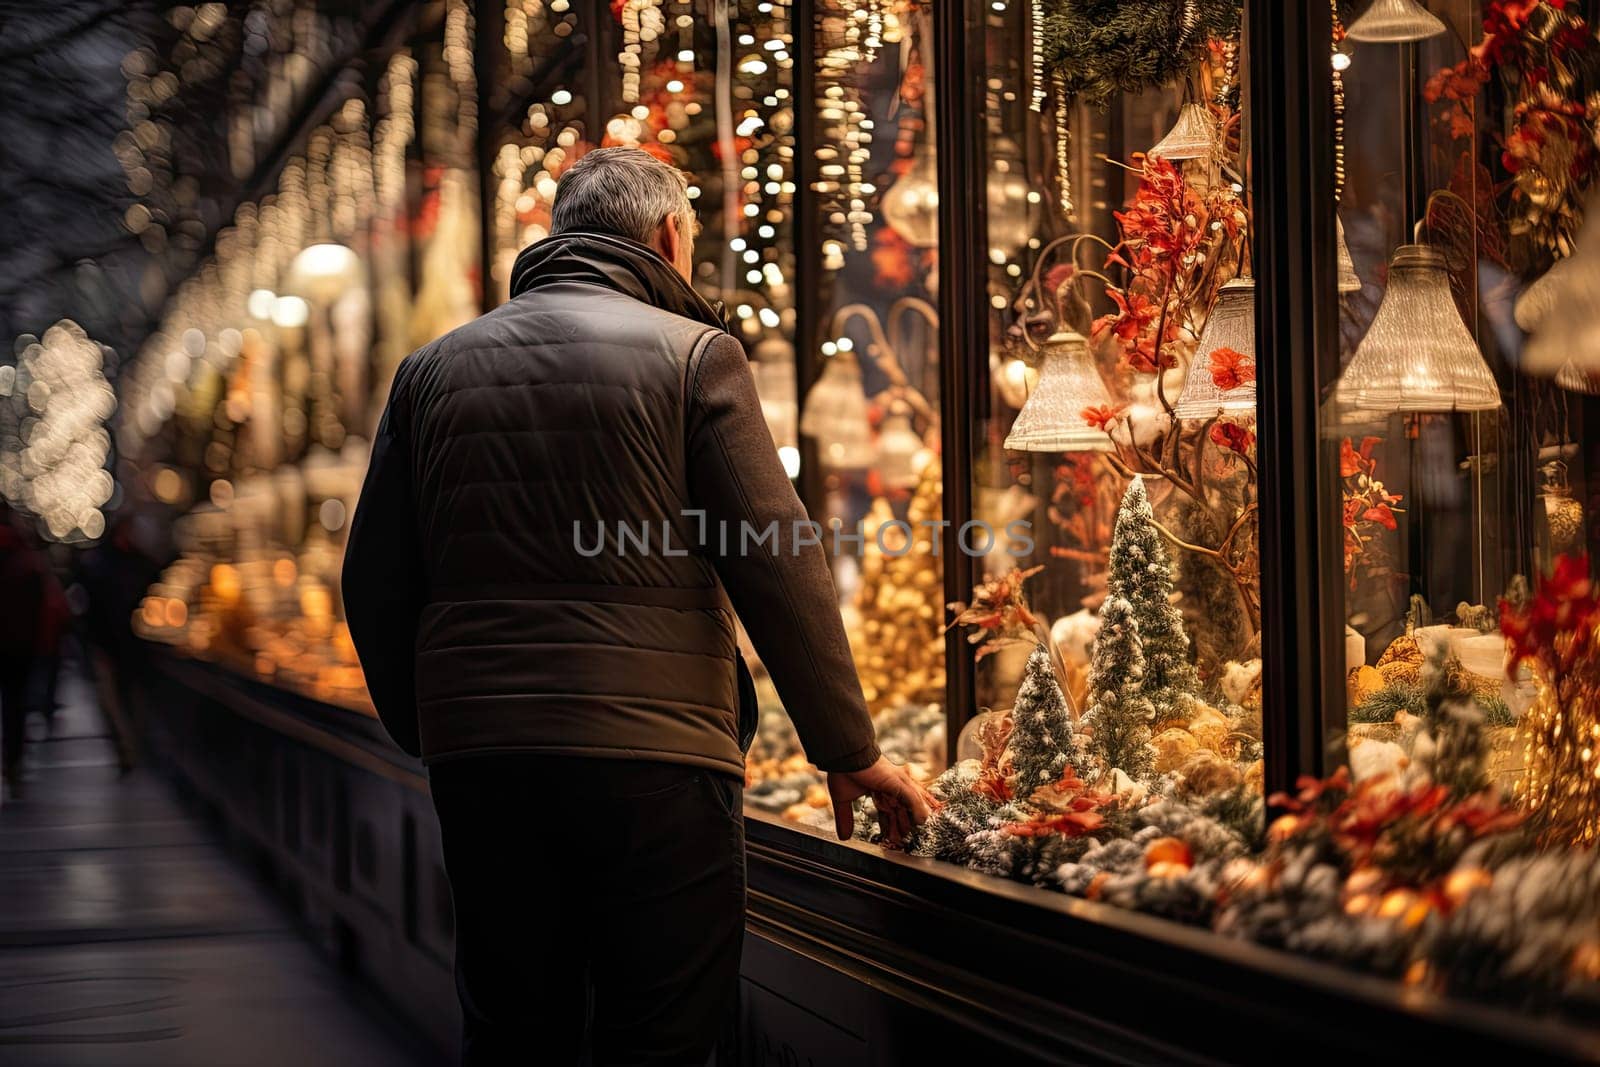 a man looking at christmas decorations in a store window with his back to the camera as he walks down the street